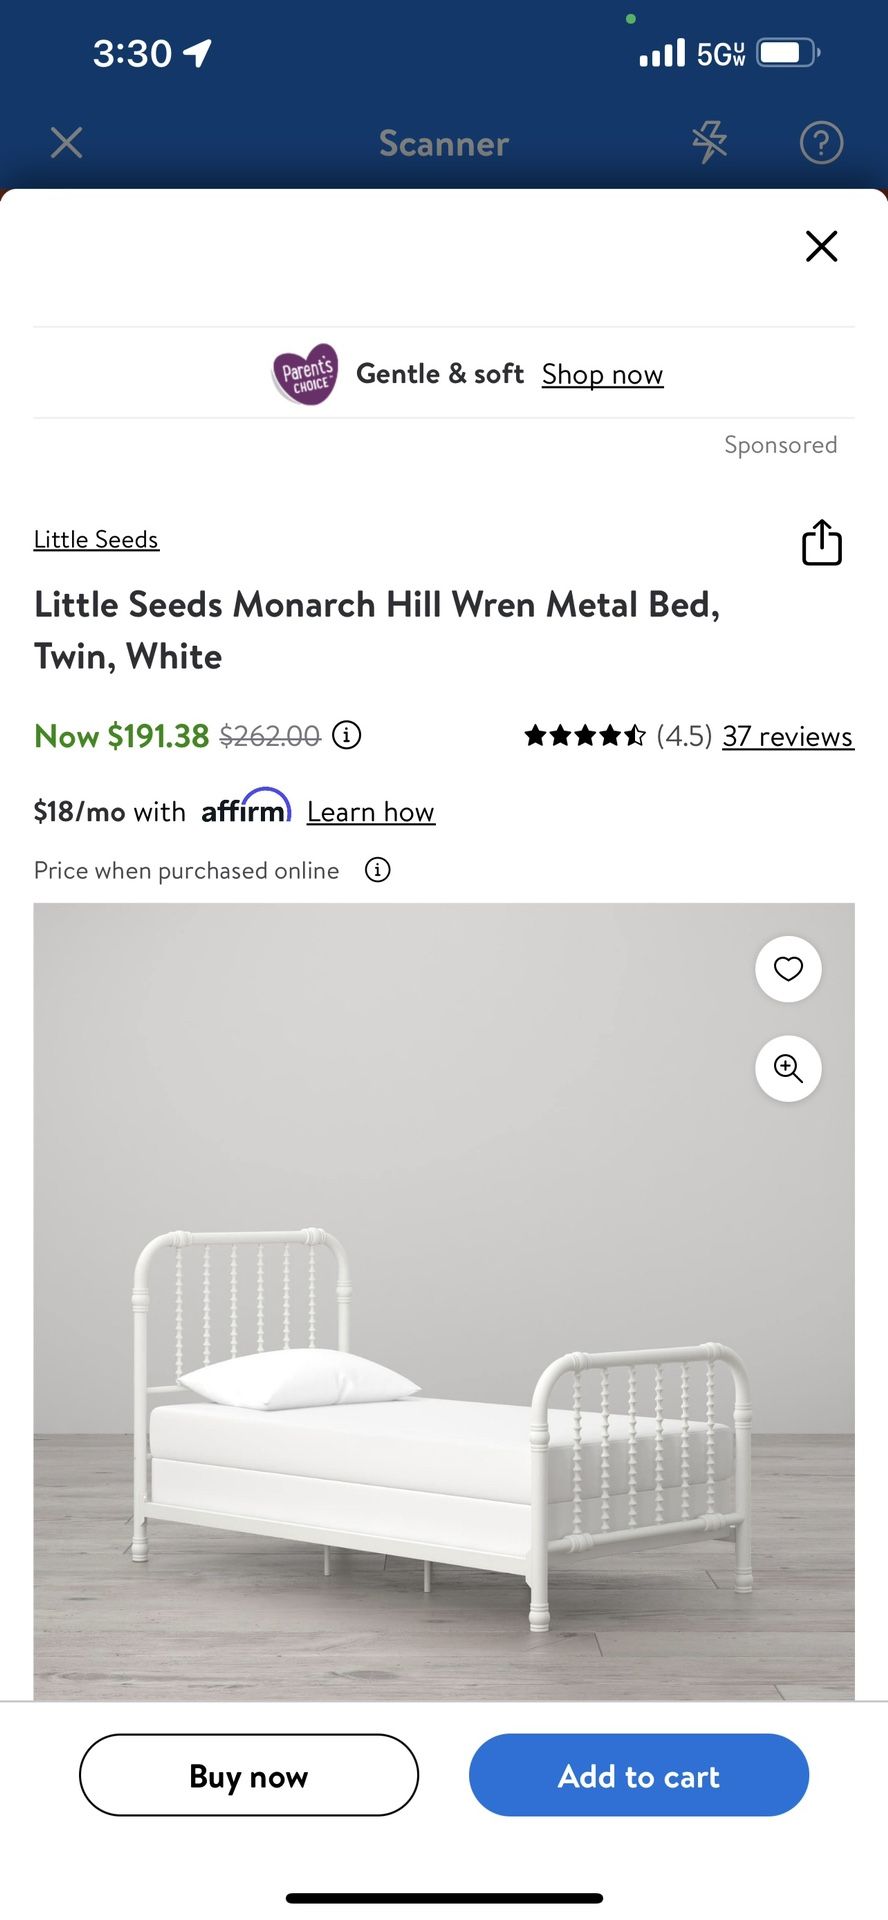 Little Seeds Monarch Hill Wren Metal Bed, Twin, White Pm if interested